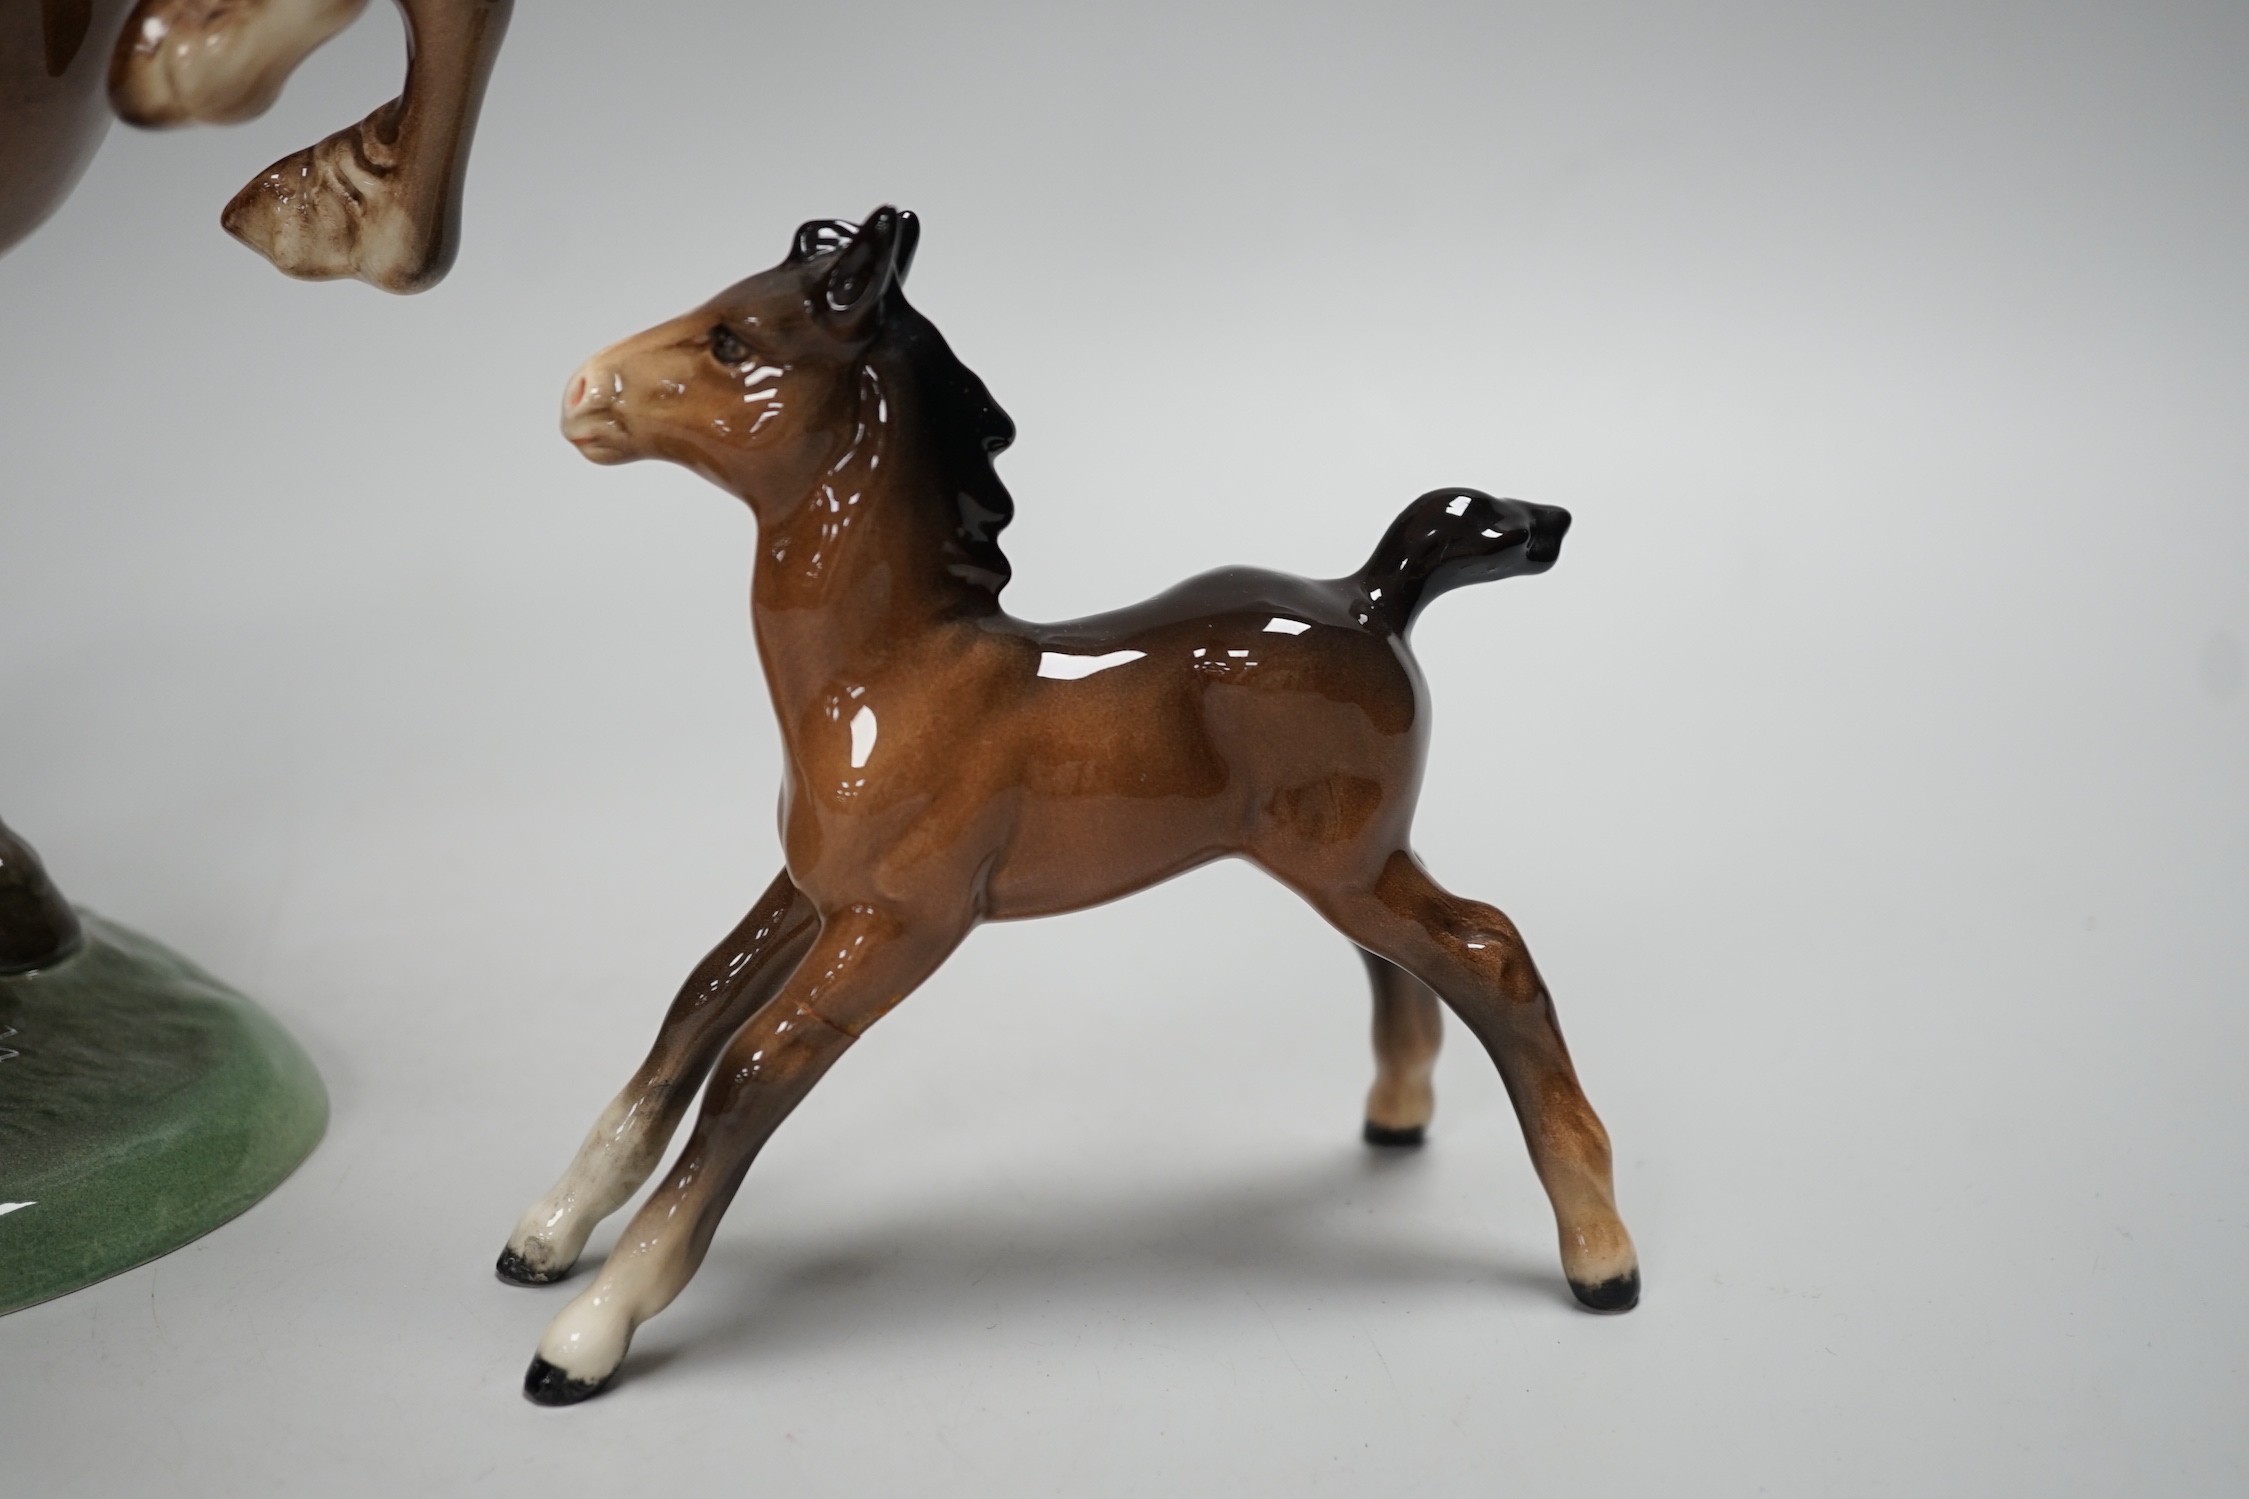 Two Beswick models of horses, one rearing and the other a foal. Tallest 27cm